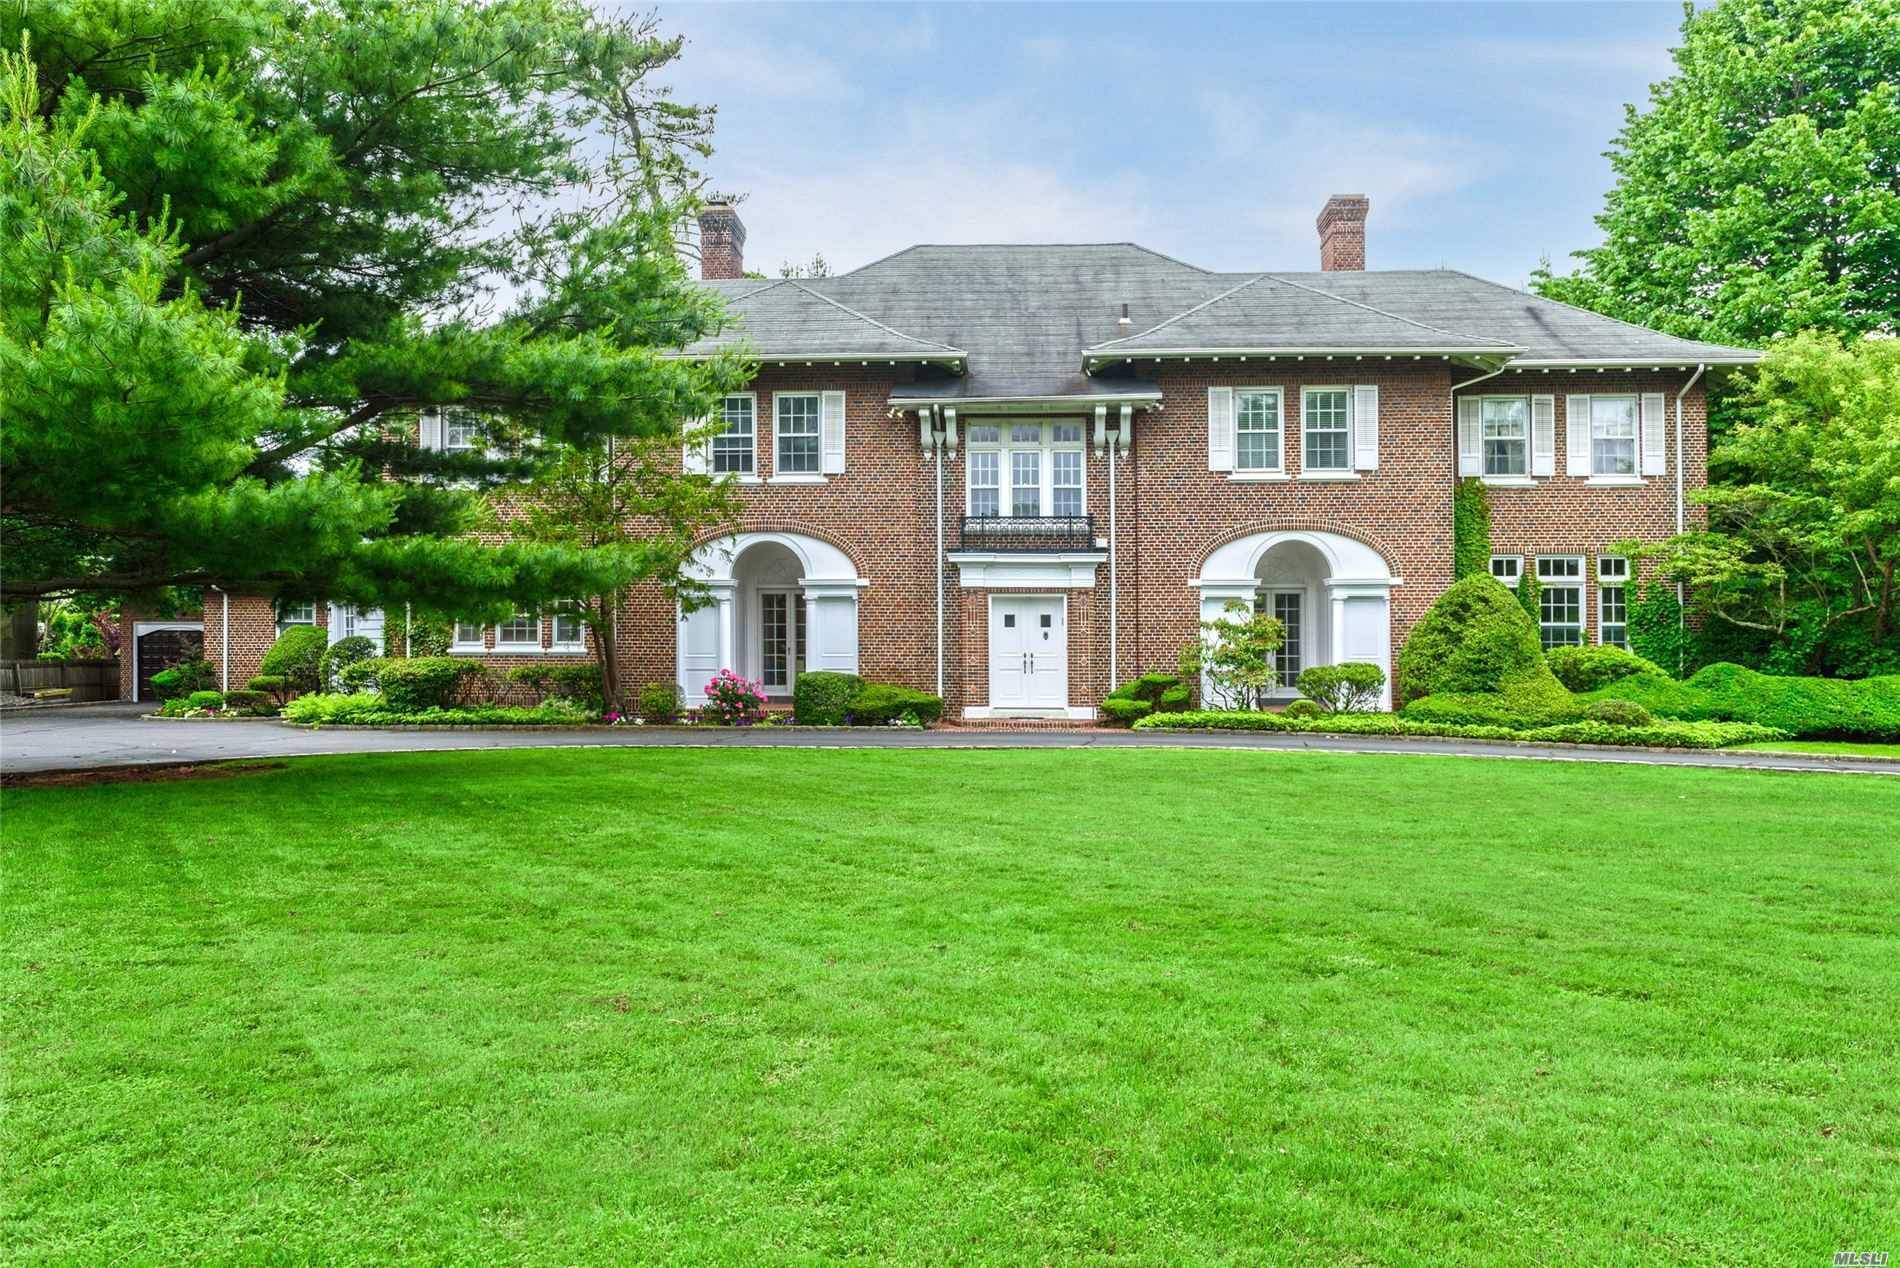 This breathtaking Woodsburgh estate is over 8000 sq ft amp ; is situated on almost an acre of spectacularly landscaped grounds, serenely tucked away with lush gardens.